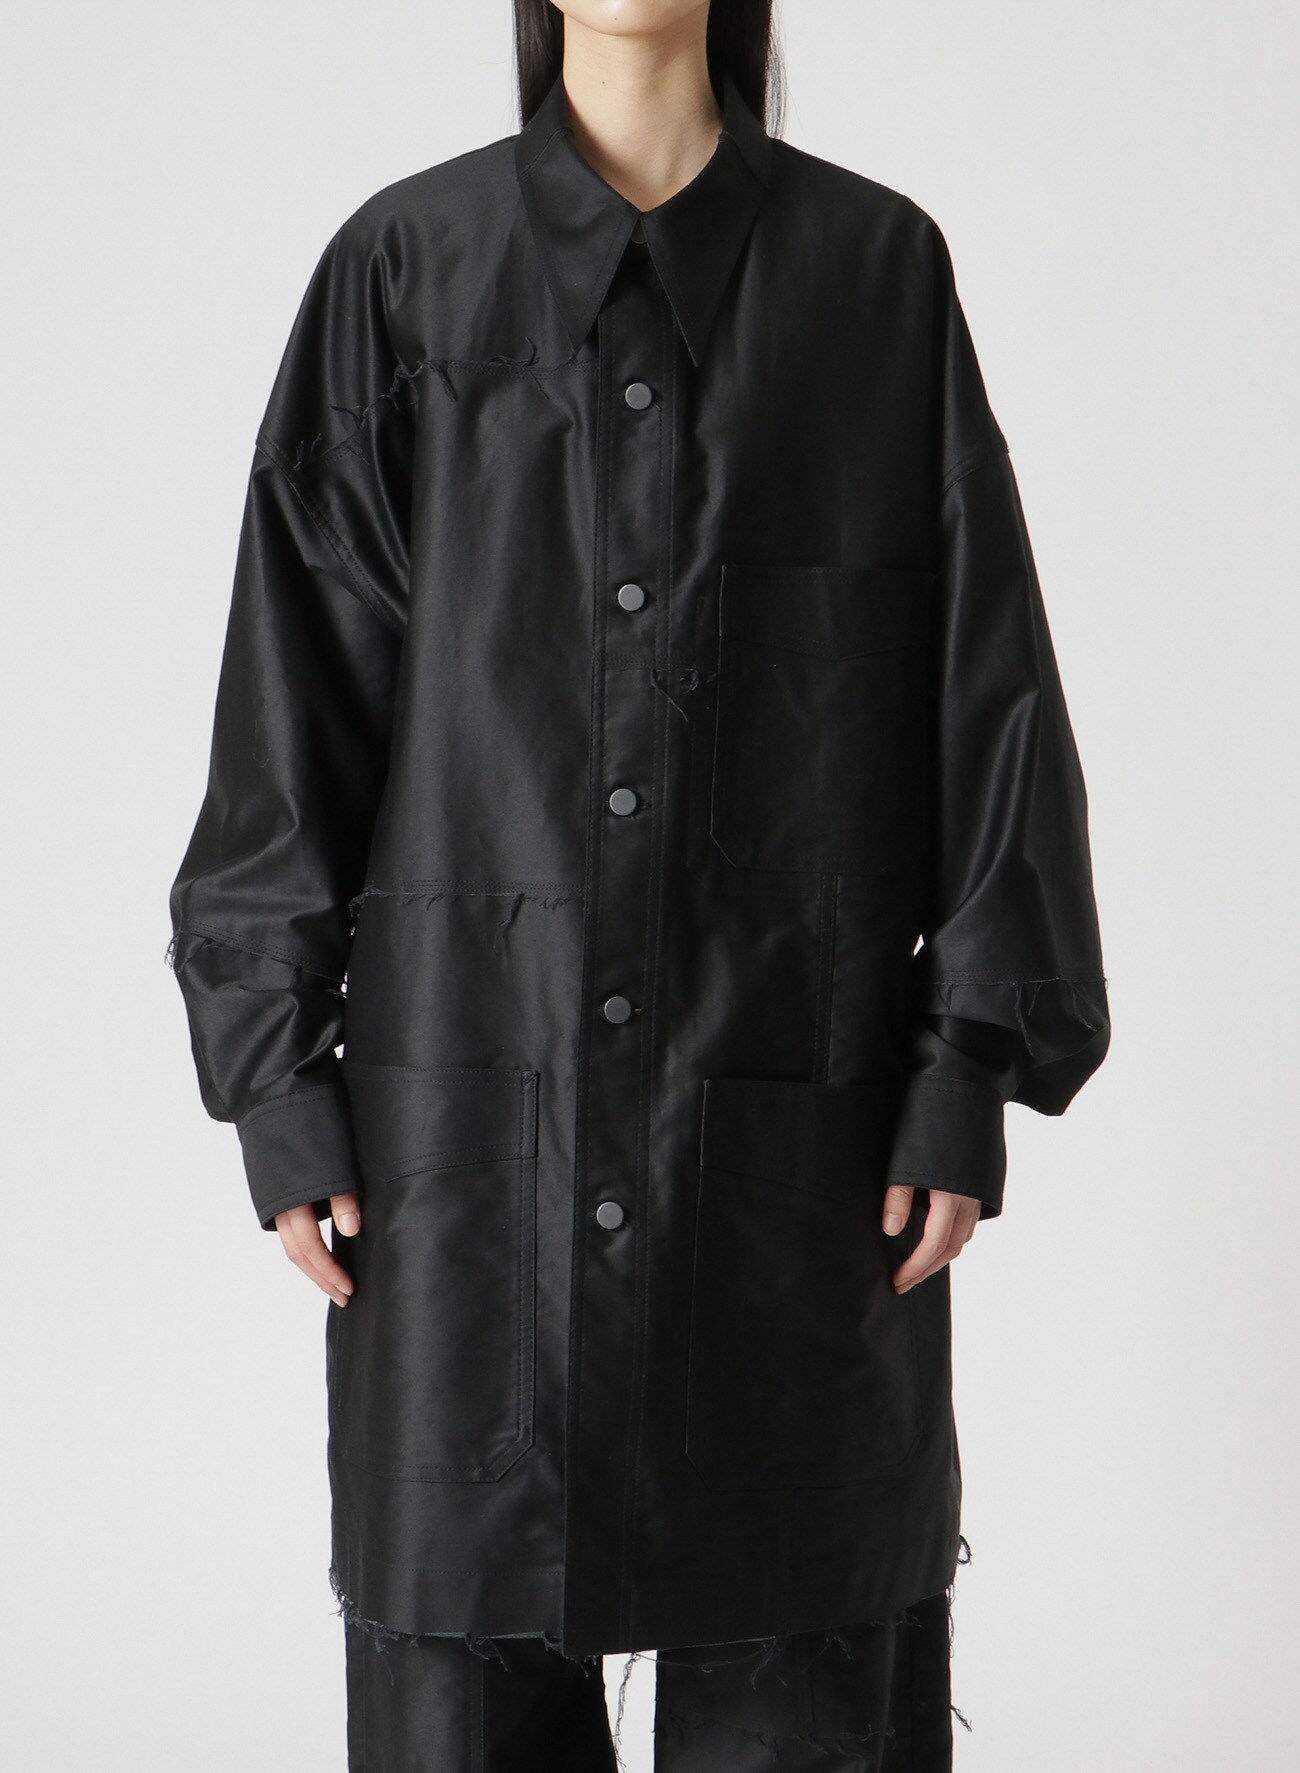 EXTRA LONG STAPLE COTTON MOLESKIN PATCHED JACKET